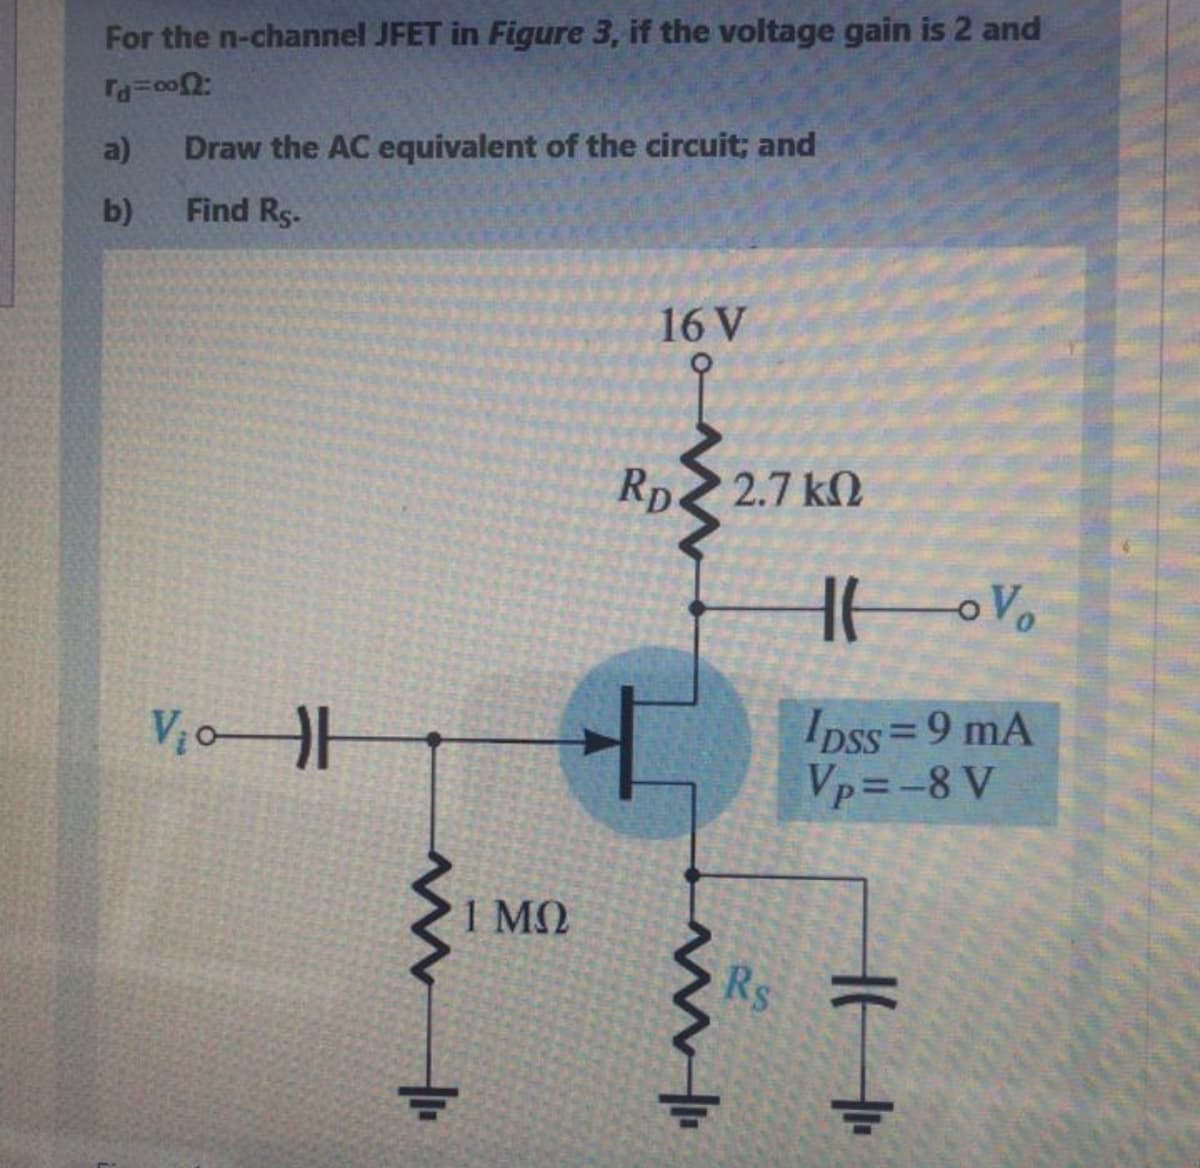 For the n-channel JFET in Figure 3, if the voltage gain is 2 and
a)
Draw the AC equivalent of the circuit; and
b)
Find Rs-
16 V
Rp
2.7 k
Ipss=9 mA
Vp=-8 V
1 MO
Rs
